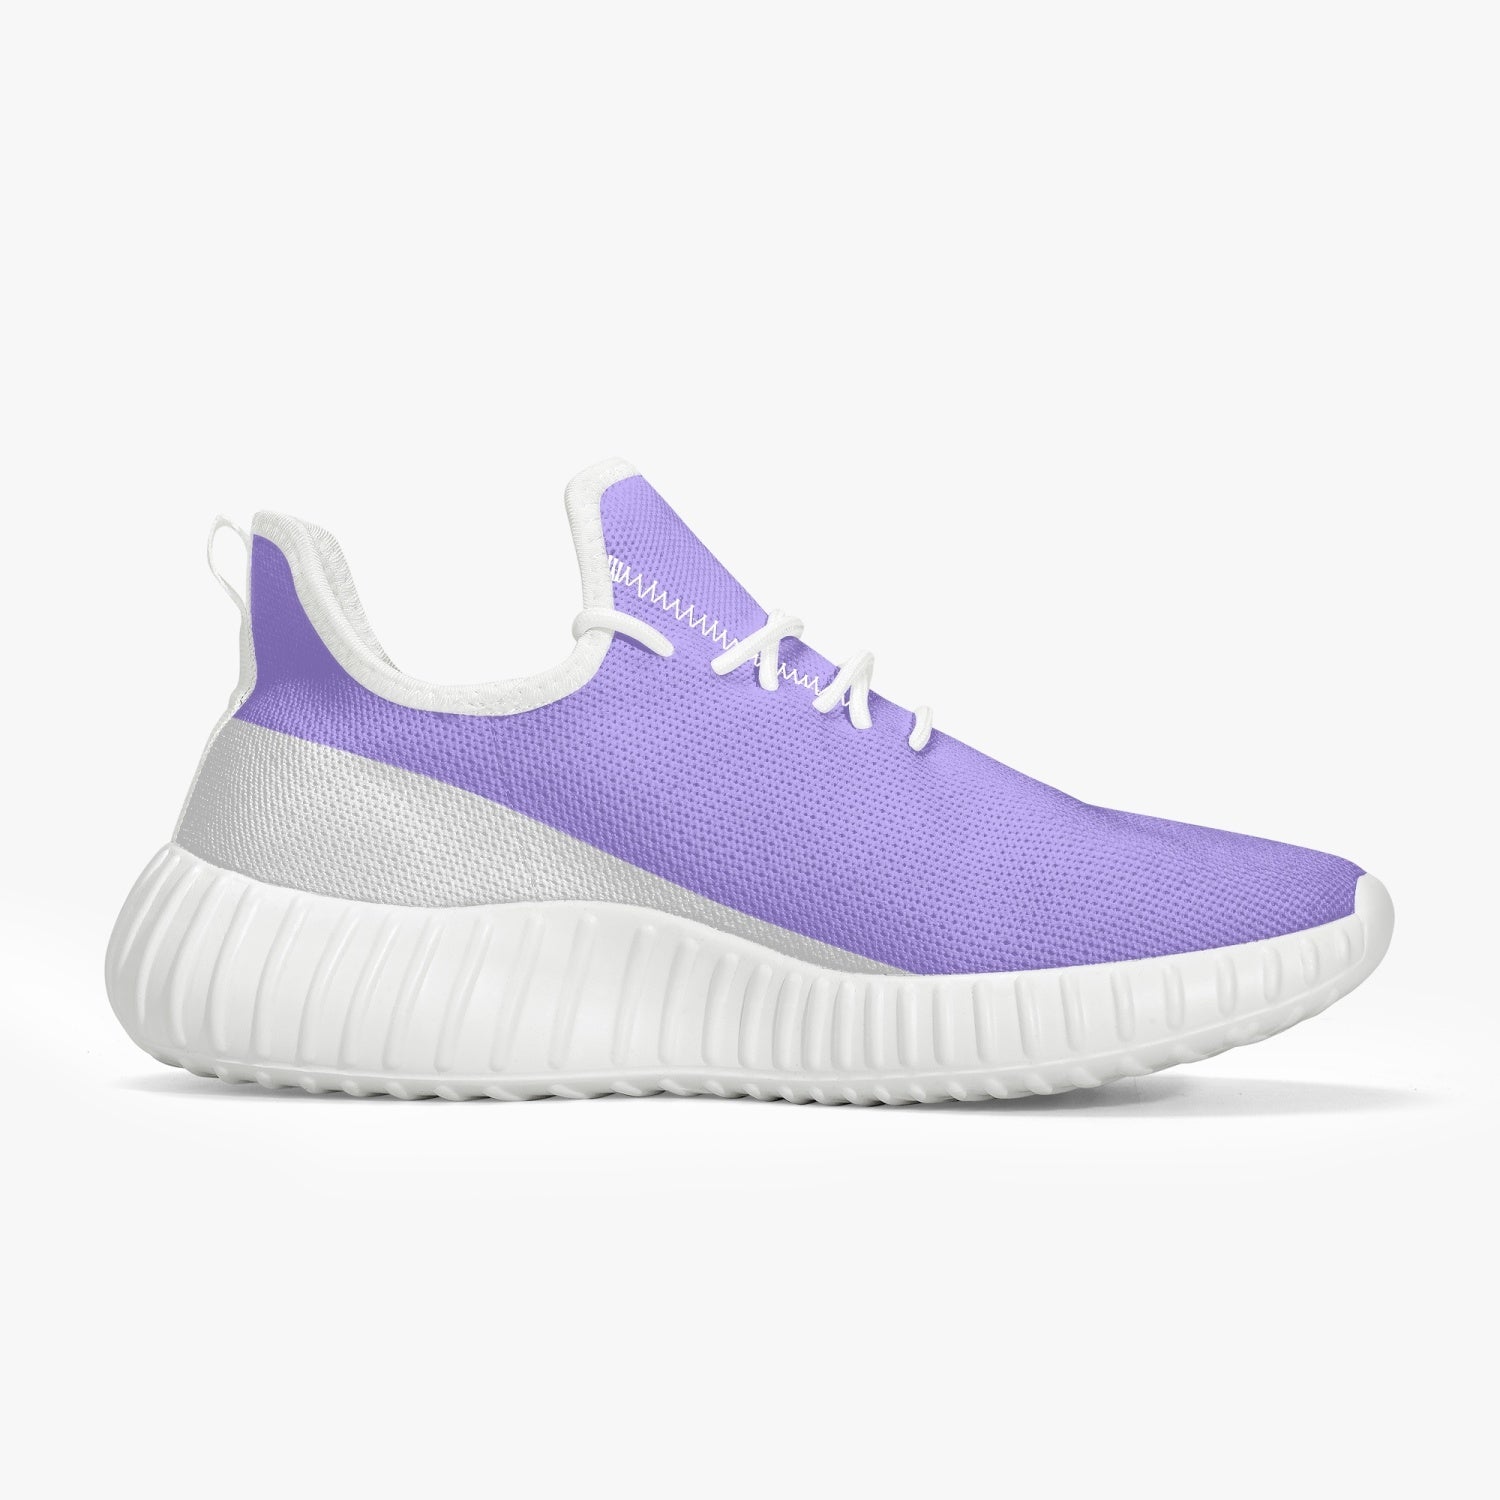 Officially Sexy Purple & White Laser Mesh Knit Sneakers - With White or Black Sole